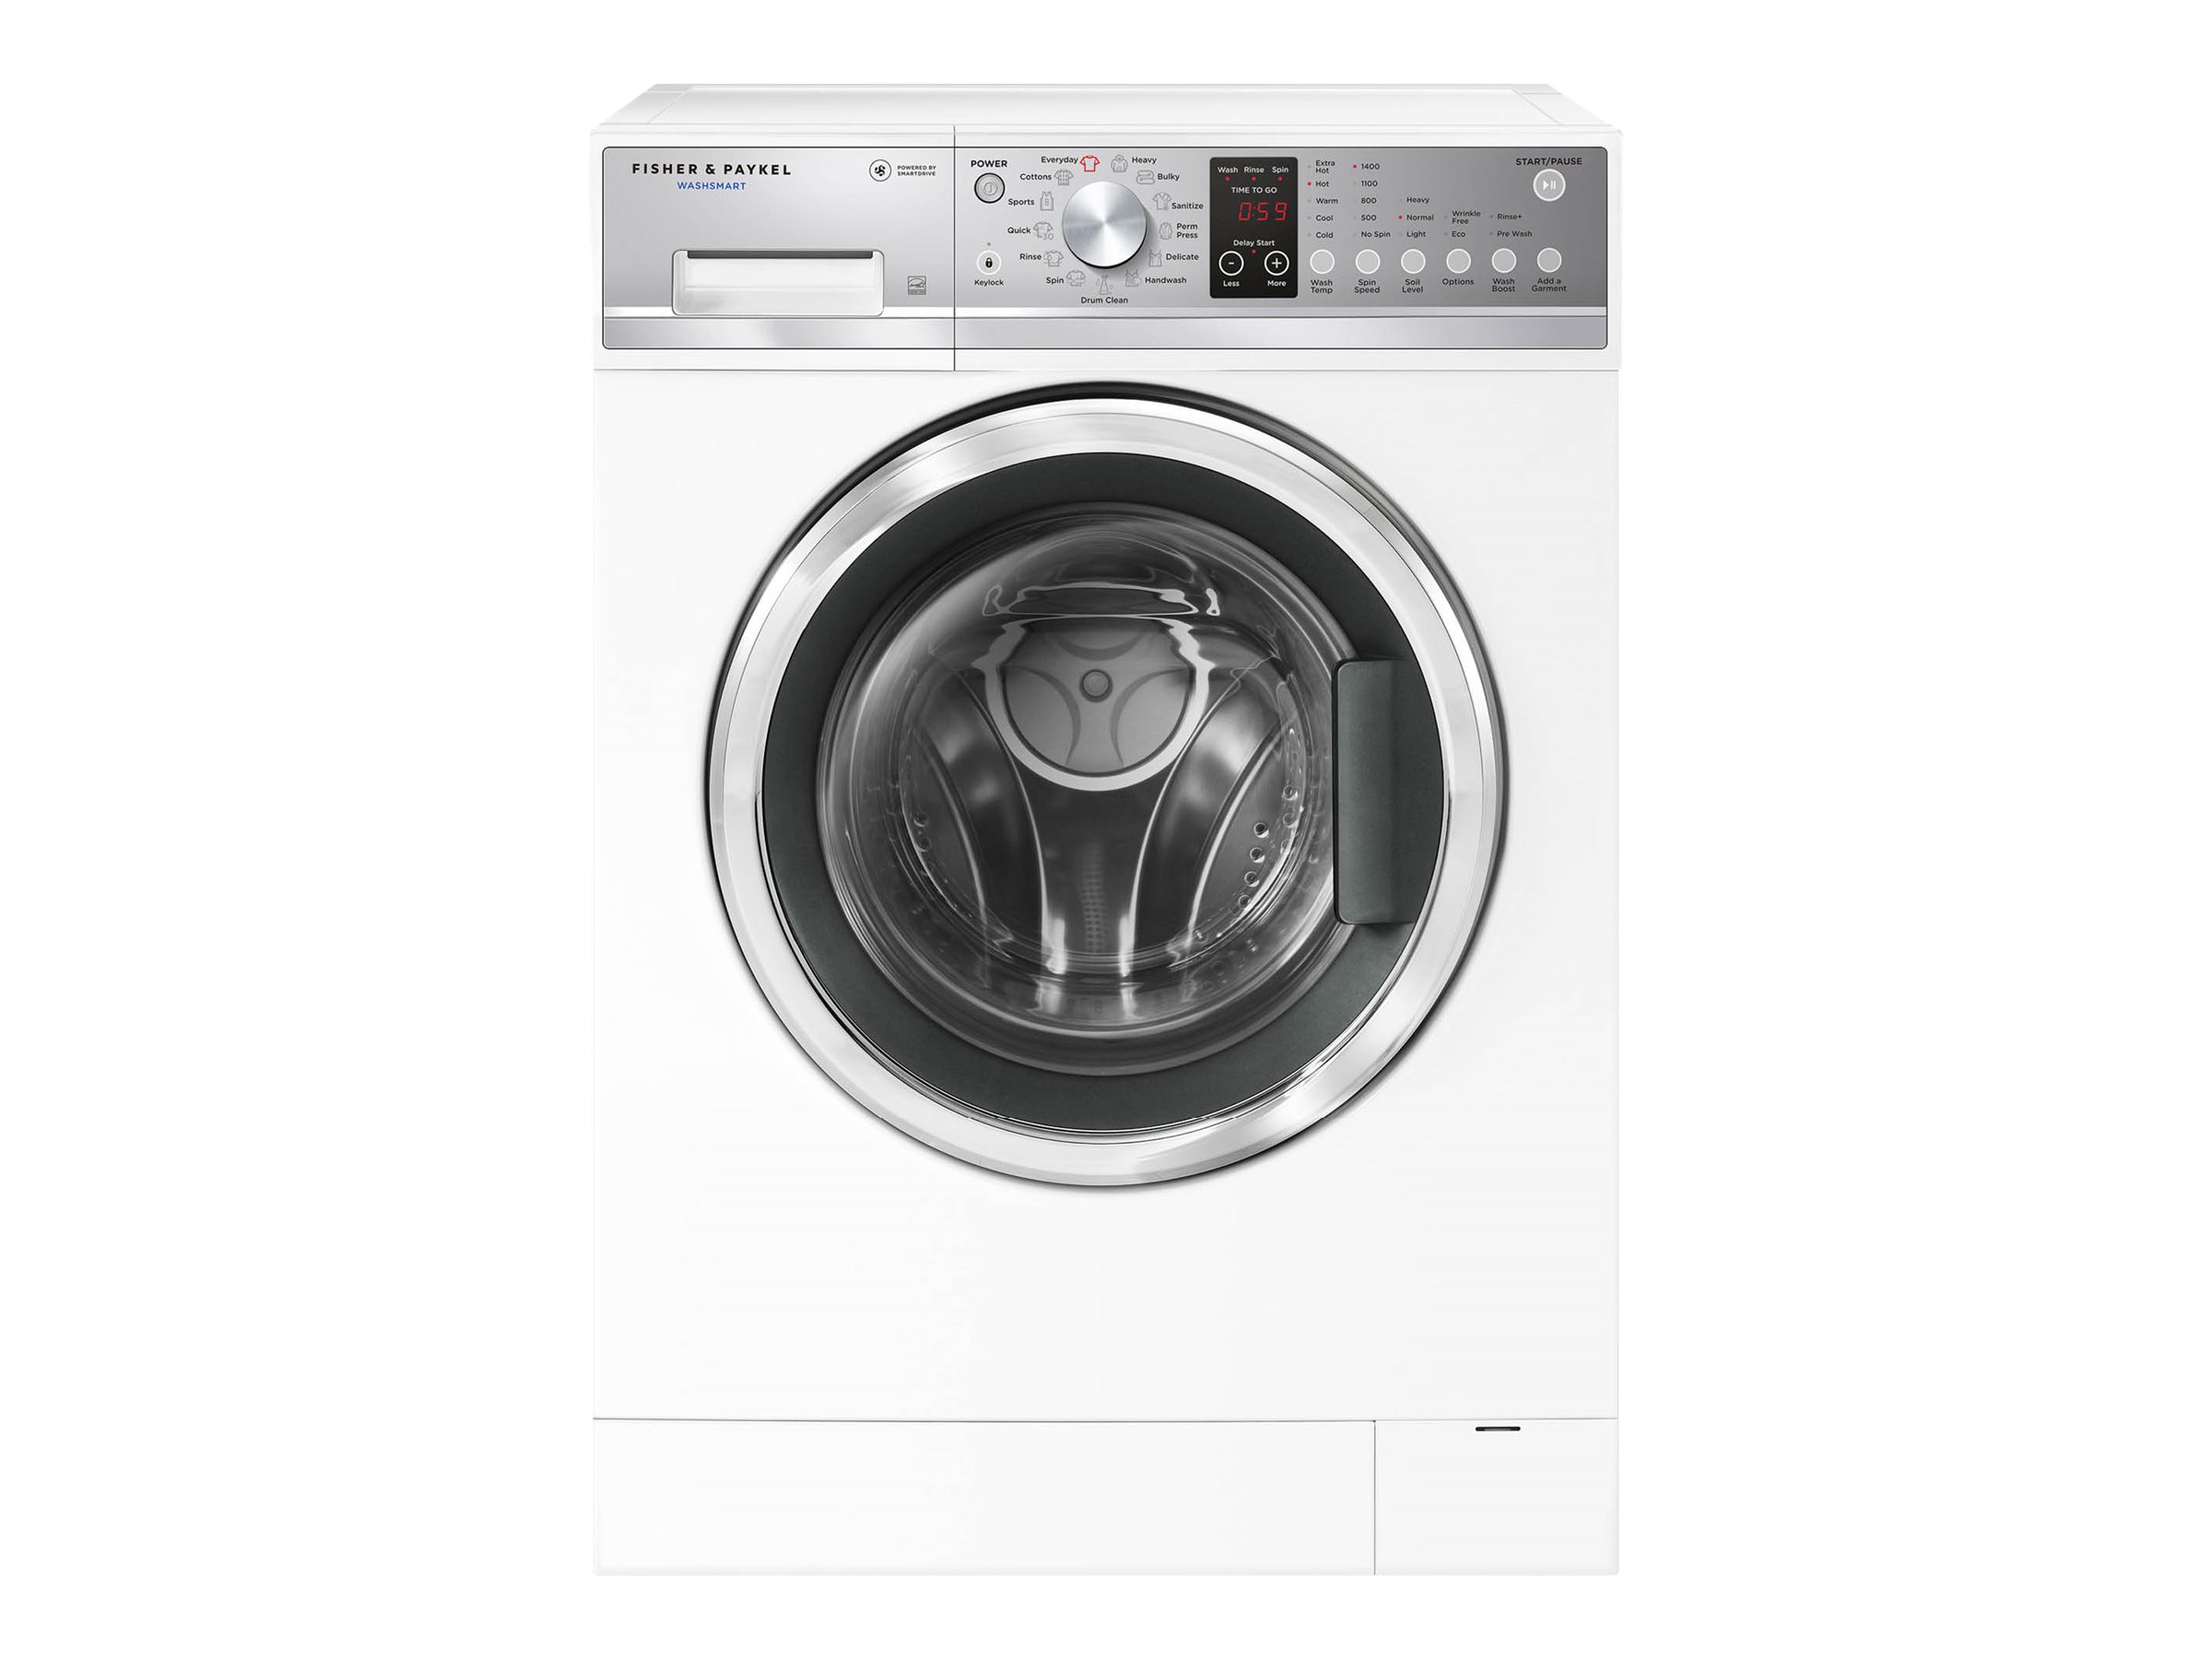 Fisher & Paykel WashSmart WH2424F1 - Washing machine - width: 23.6 in - depth: 25.4 in - height: 33.5 in - front loading - 2.4 cu. ft - 1400 rpm - white - image 1 of 7